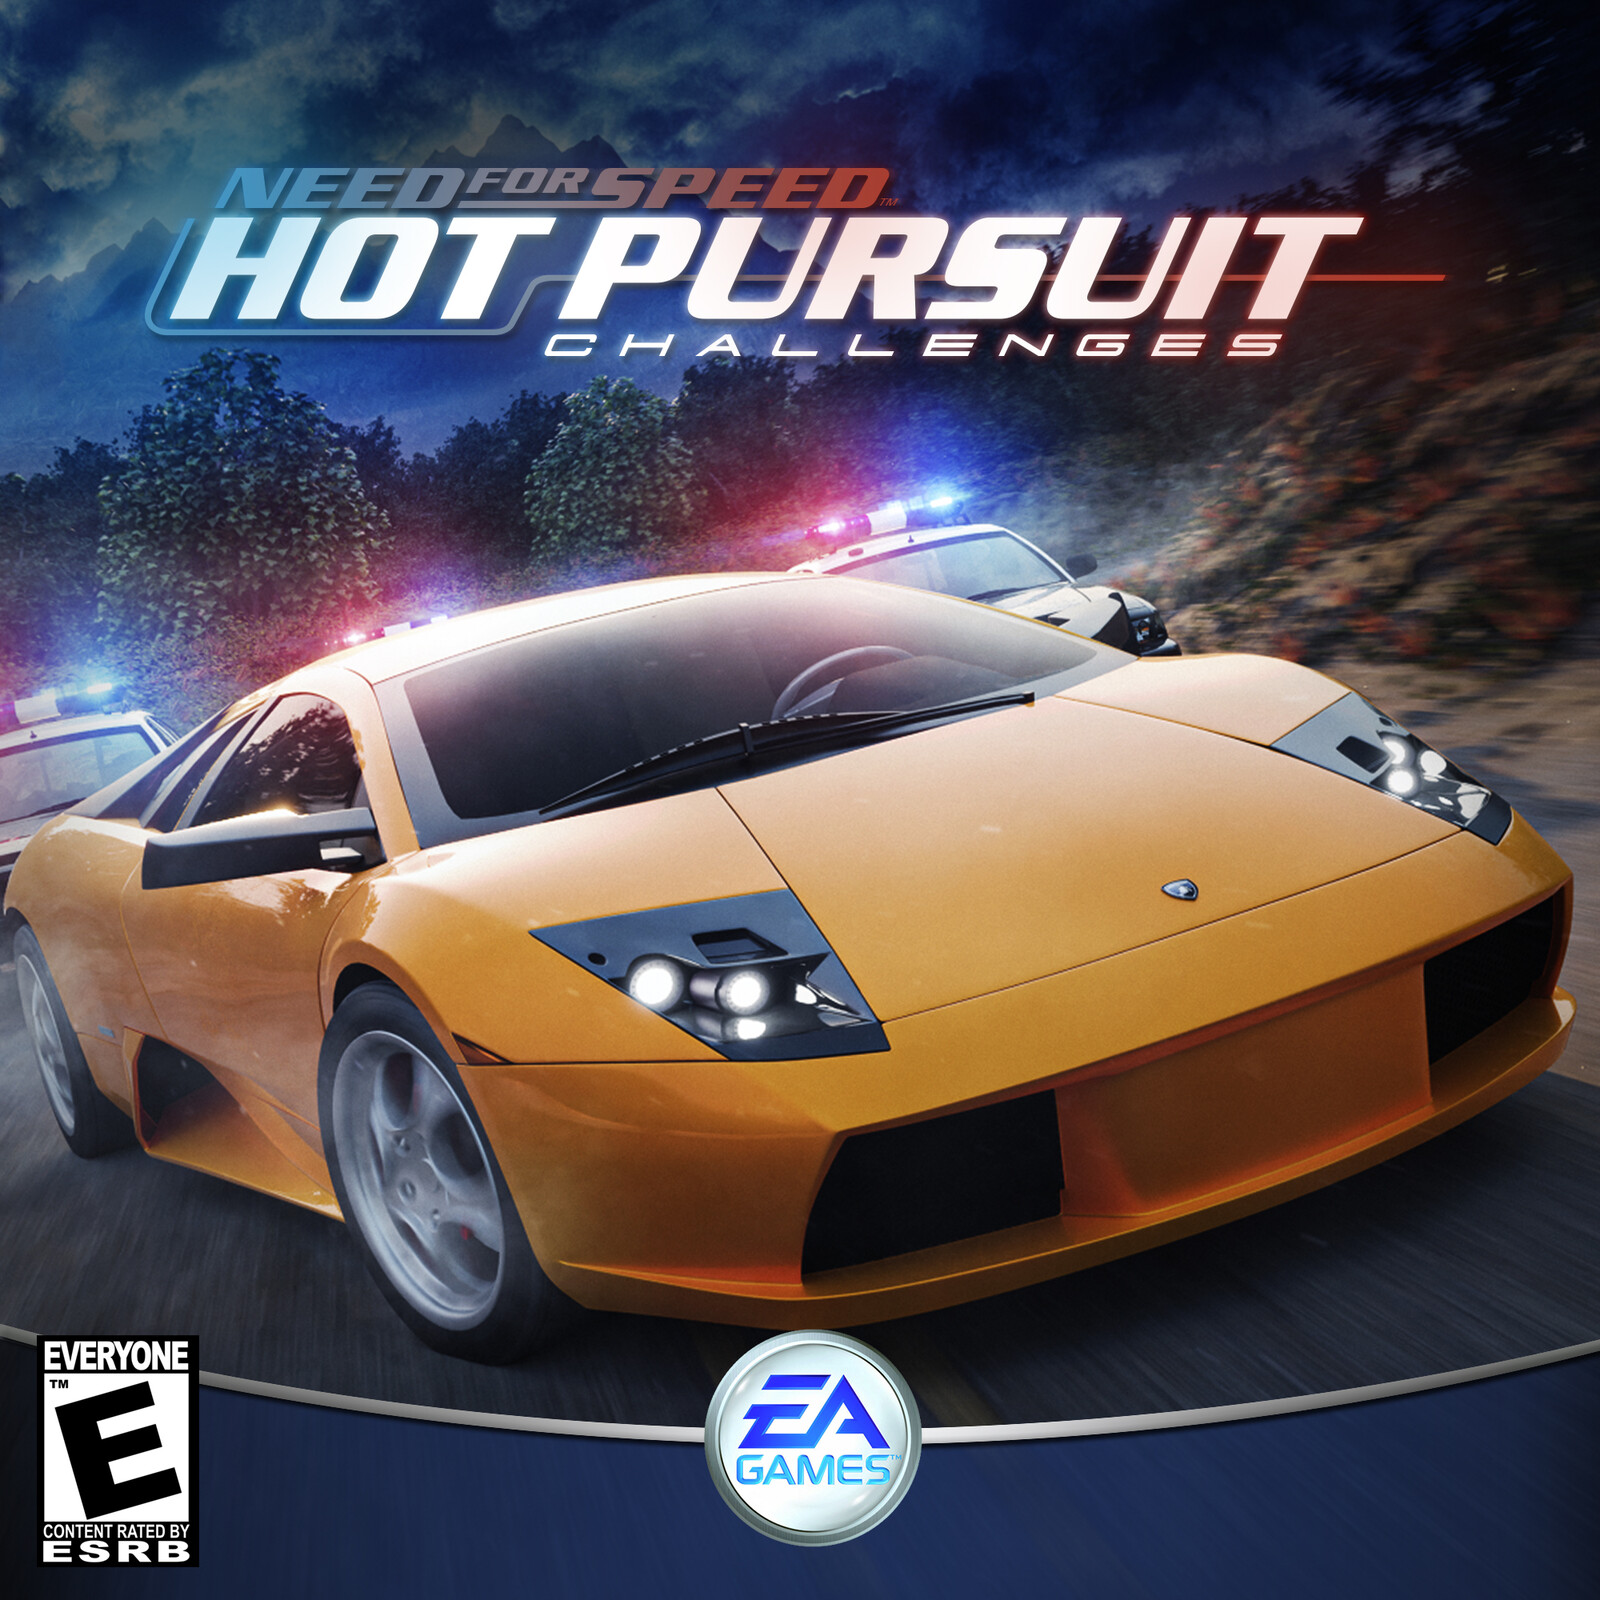 Need for Speed: Hot Pursuit Challenges (Designed by @elaymm4, Original Render by @Darudnik)